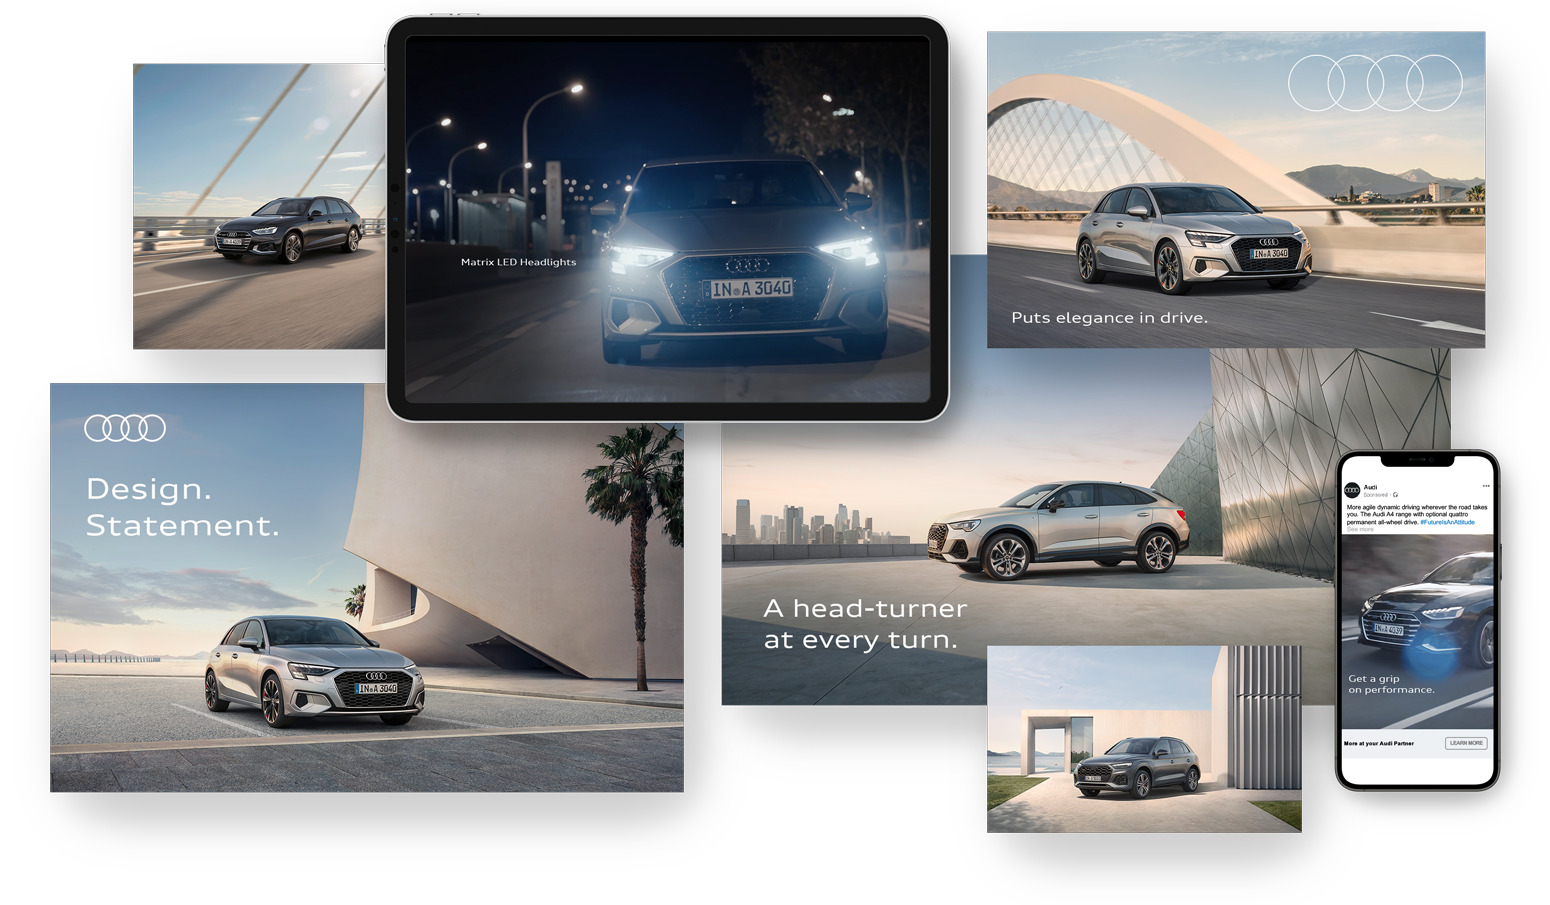 Audi_Brand2Sales_CampaignAssets_1550×905_05_Overview_02_png24